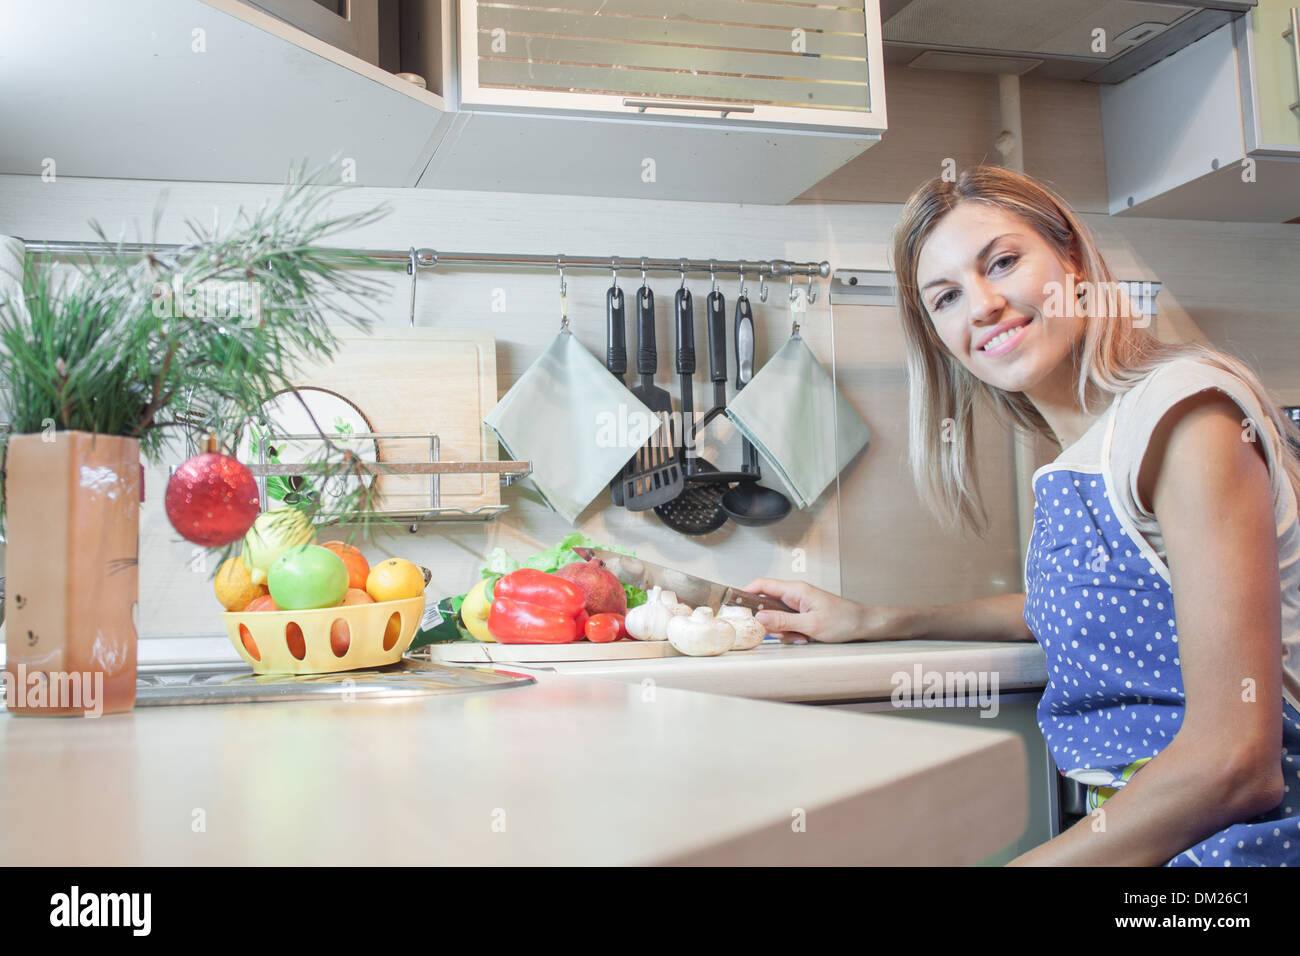 woman cooking kitchen happy 'healthy food' smiling Stock Photo